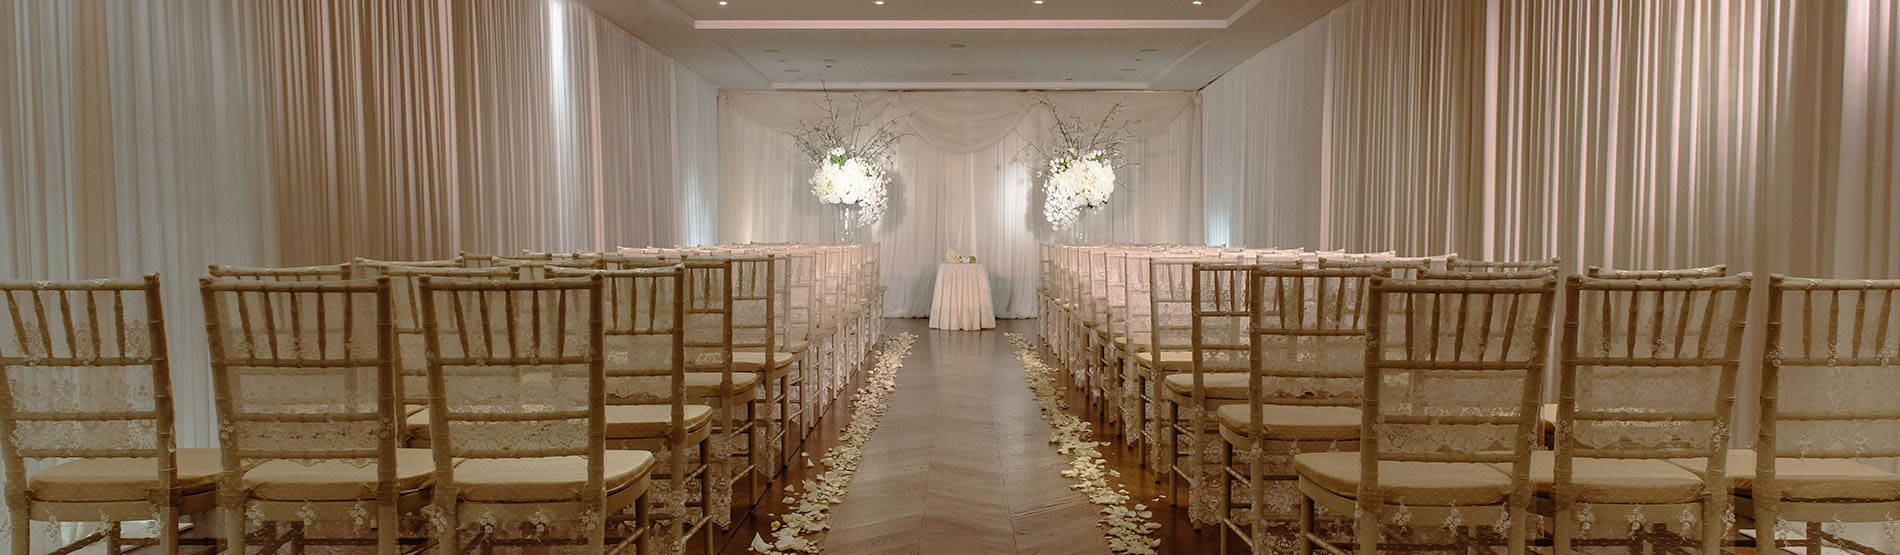 room prepared for a wedding ceremony